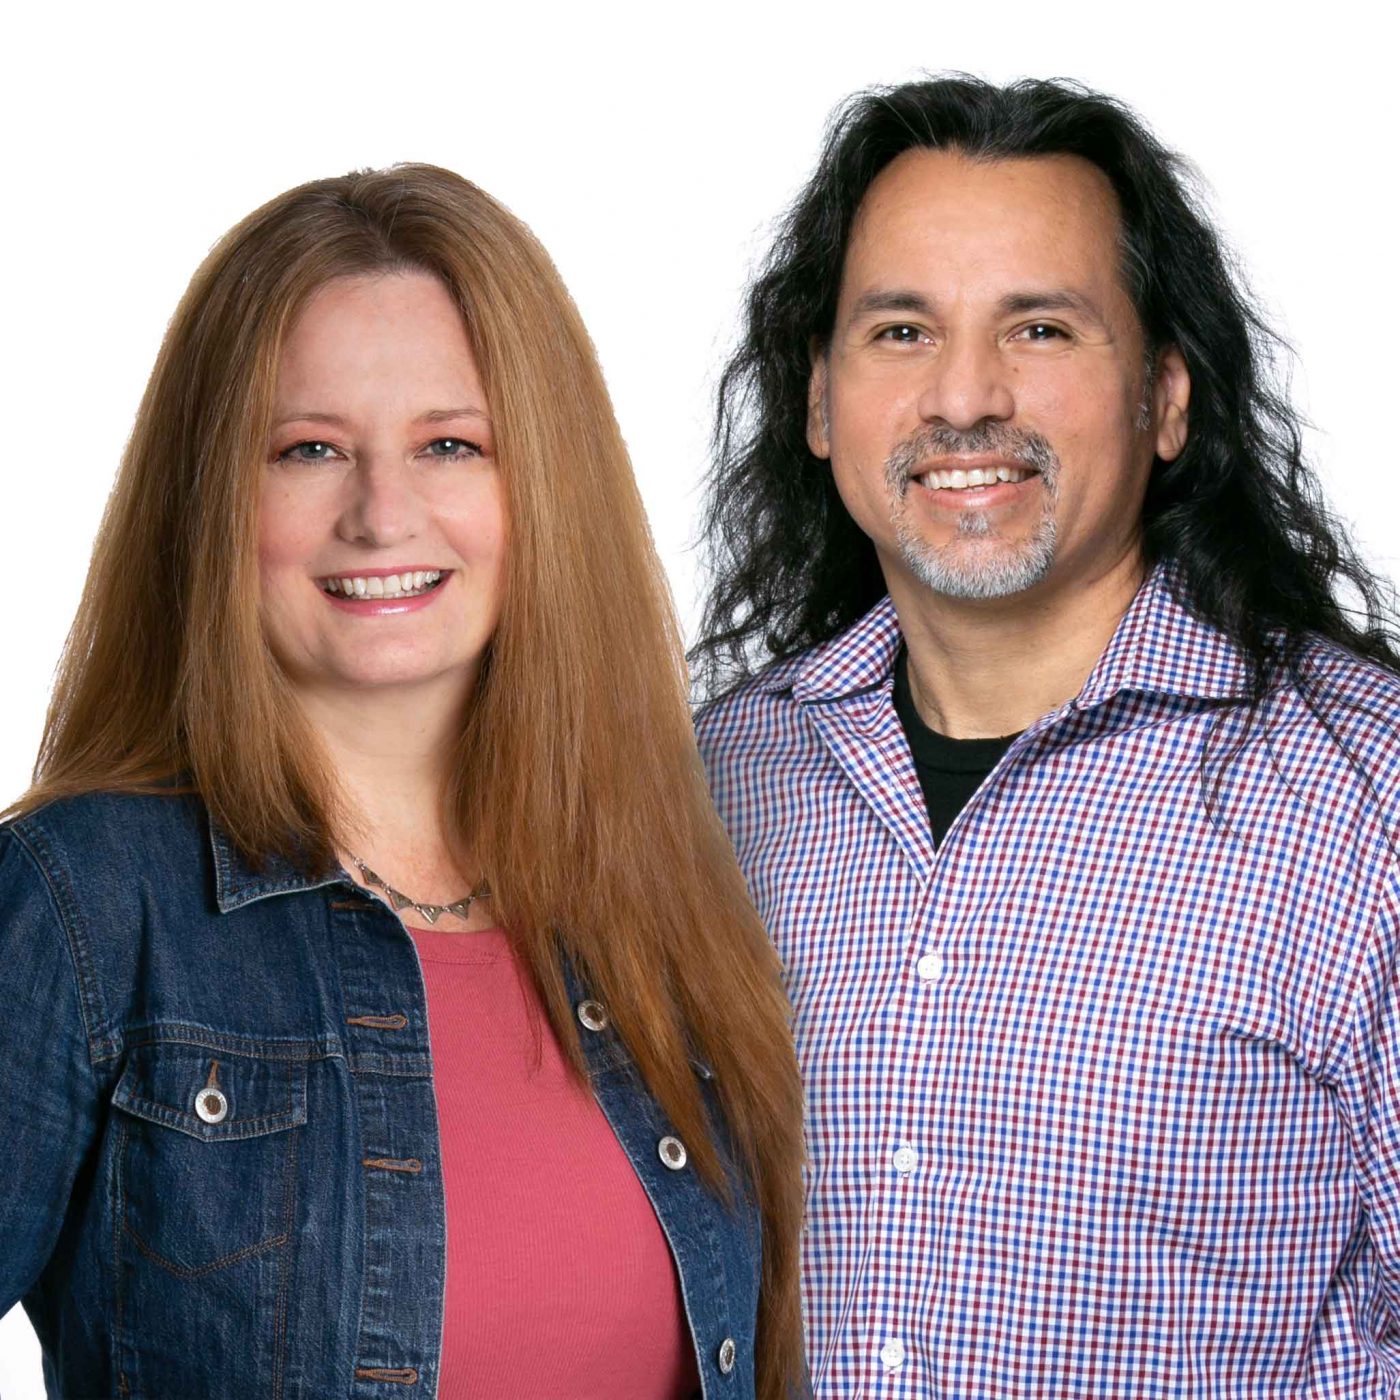 Liz and Eddy, Owners of SangFroid Web, LLC